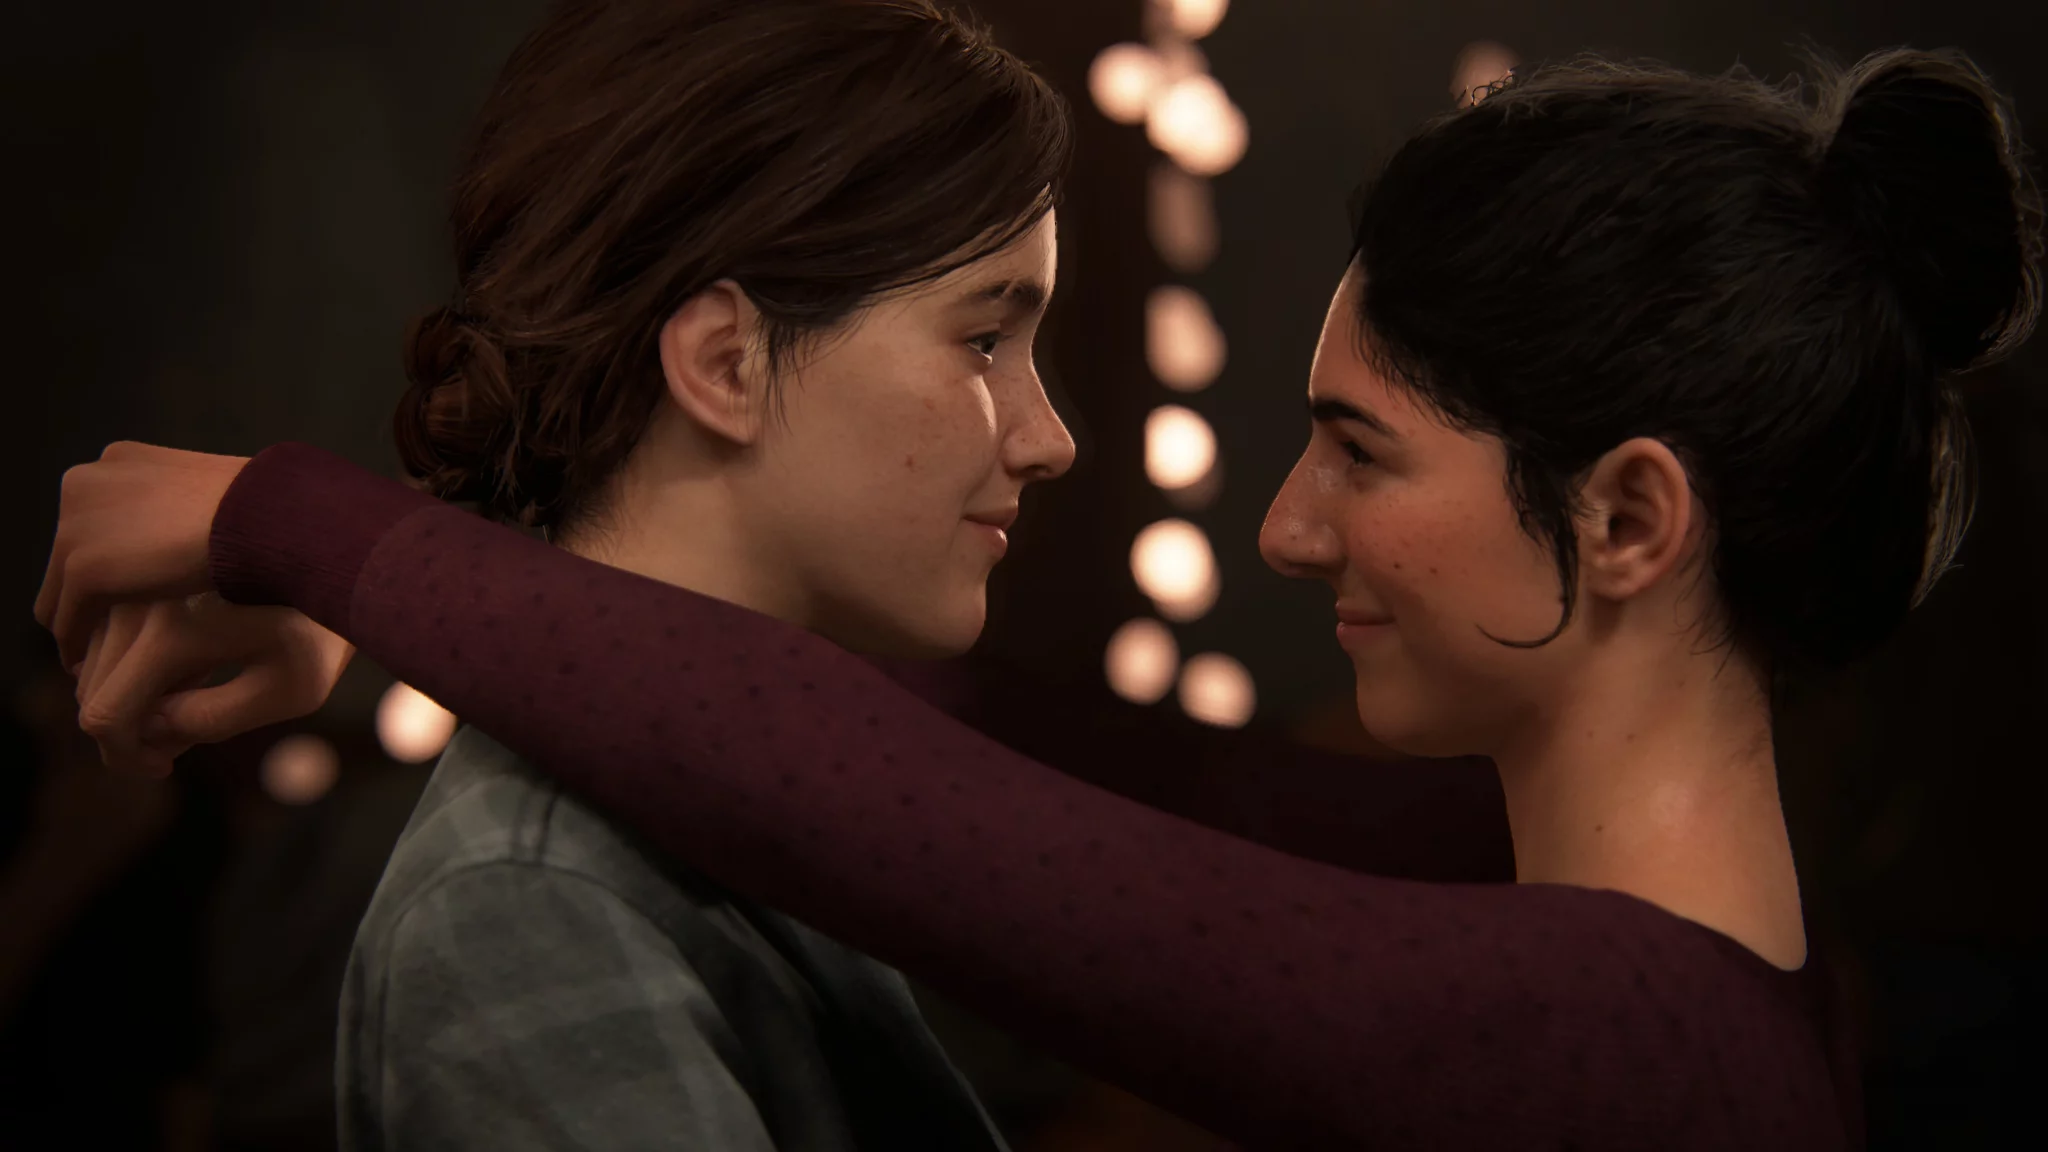 Credit: Naughty Dog (The Last of Us)